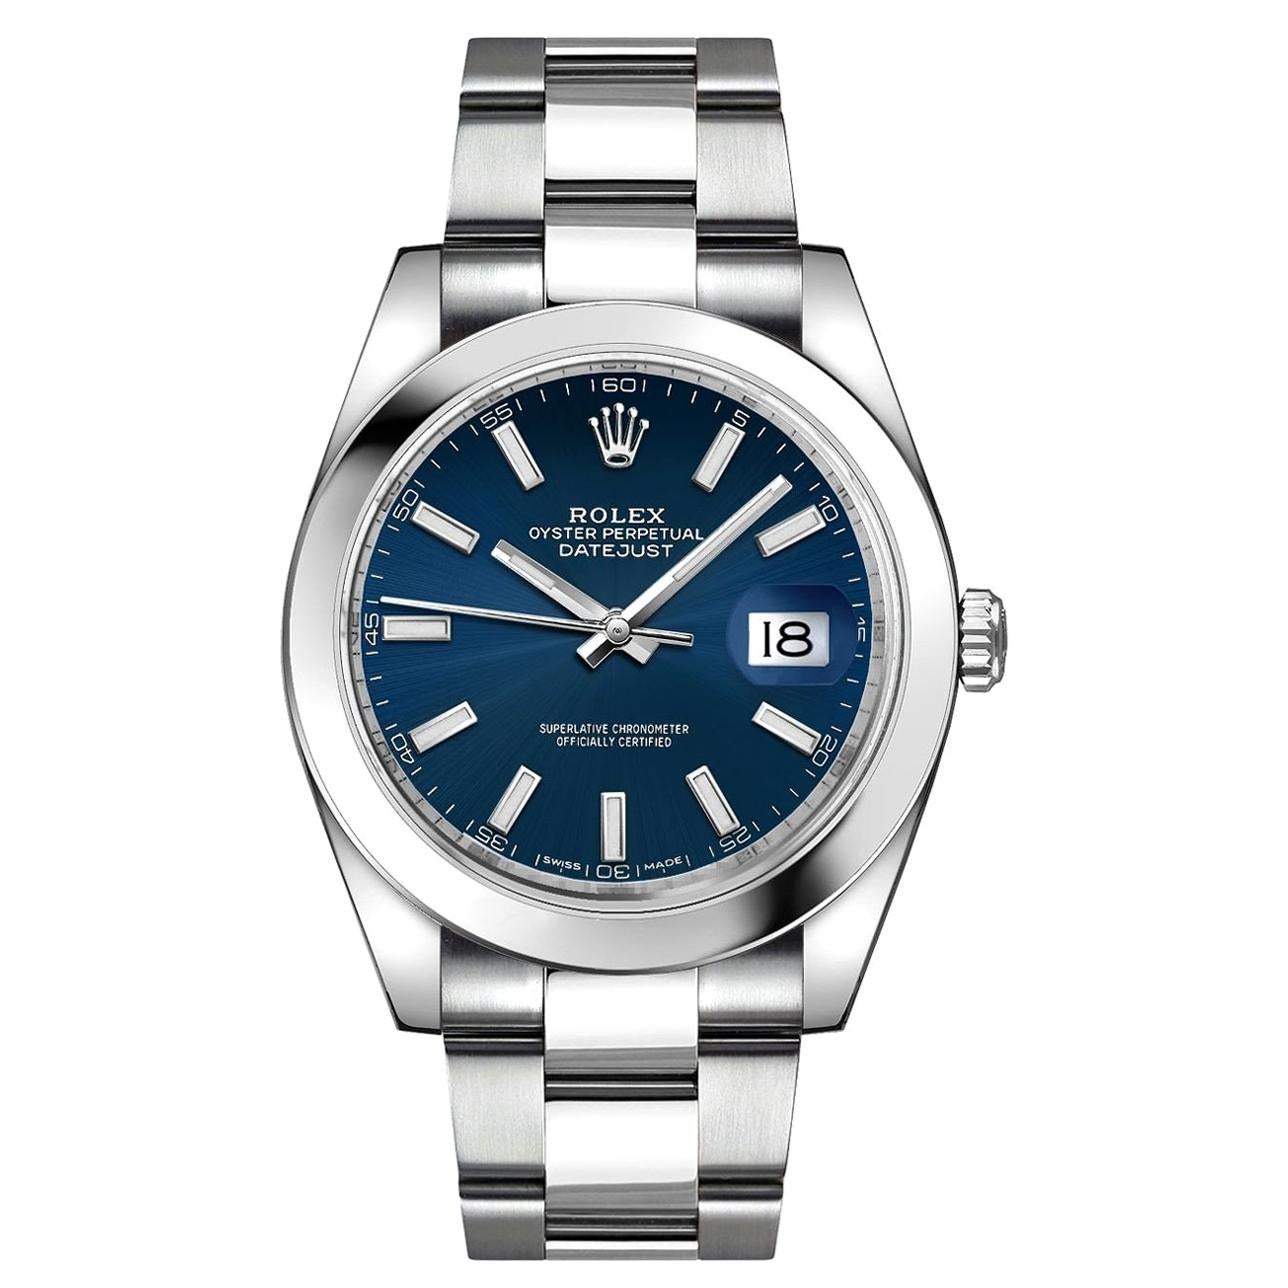 Certified Authentic Rolex Datejust II7440, Blue Dial For Sale